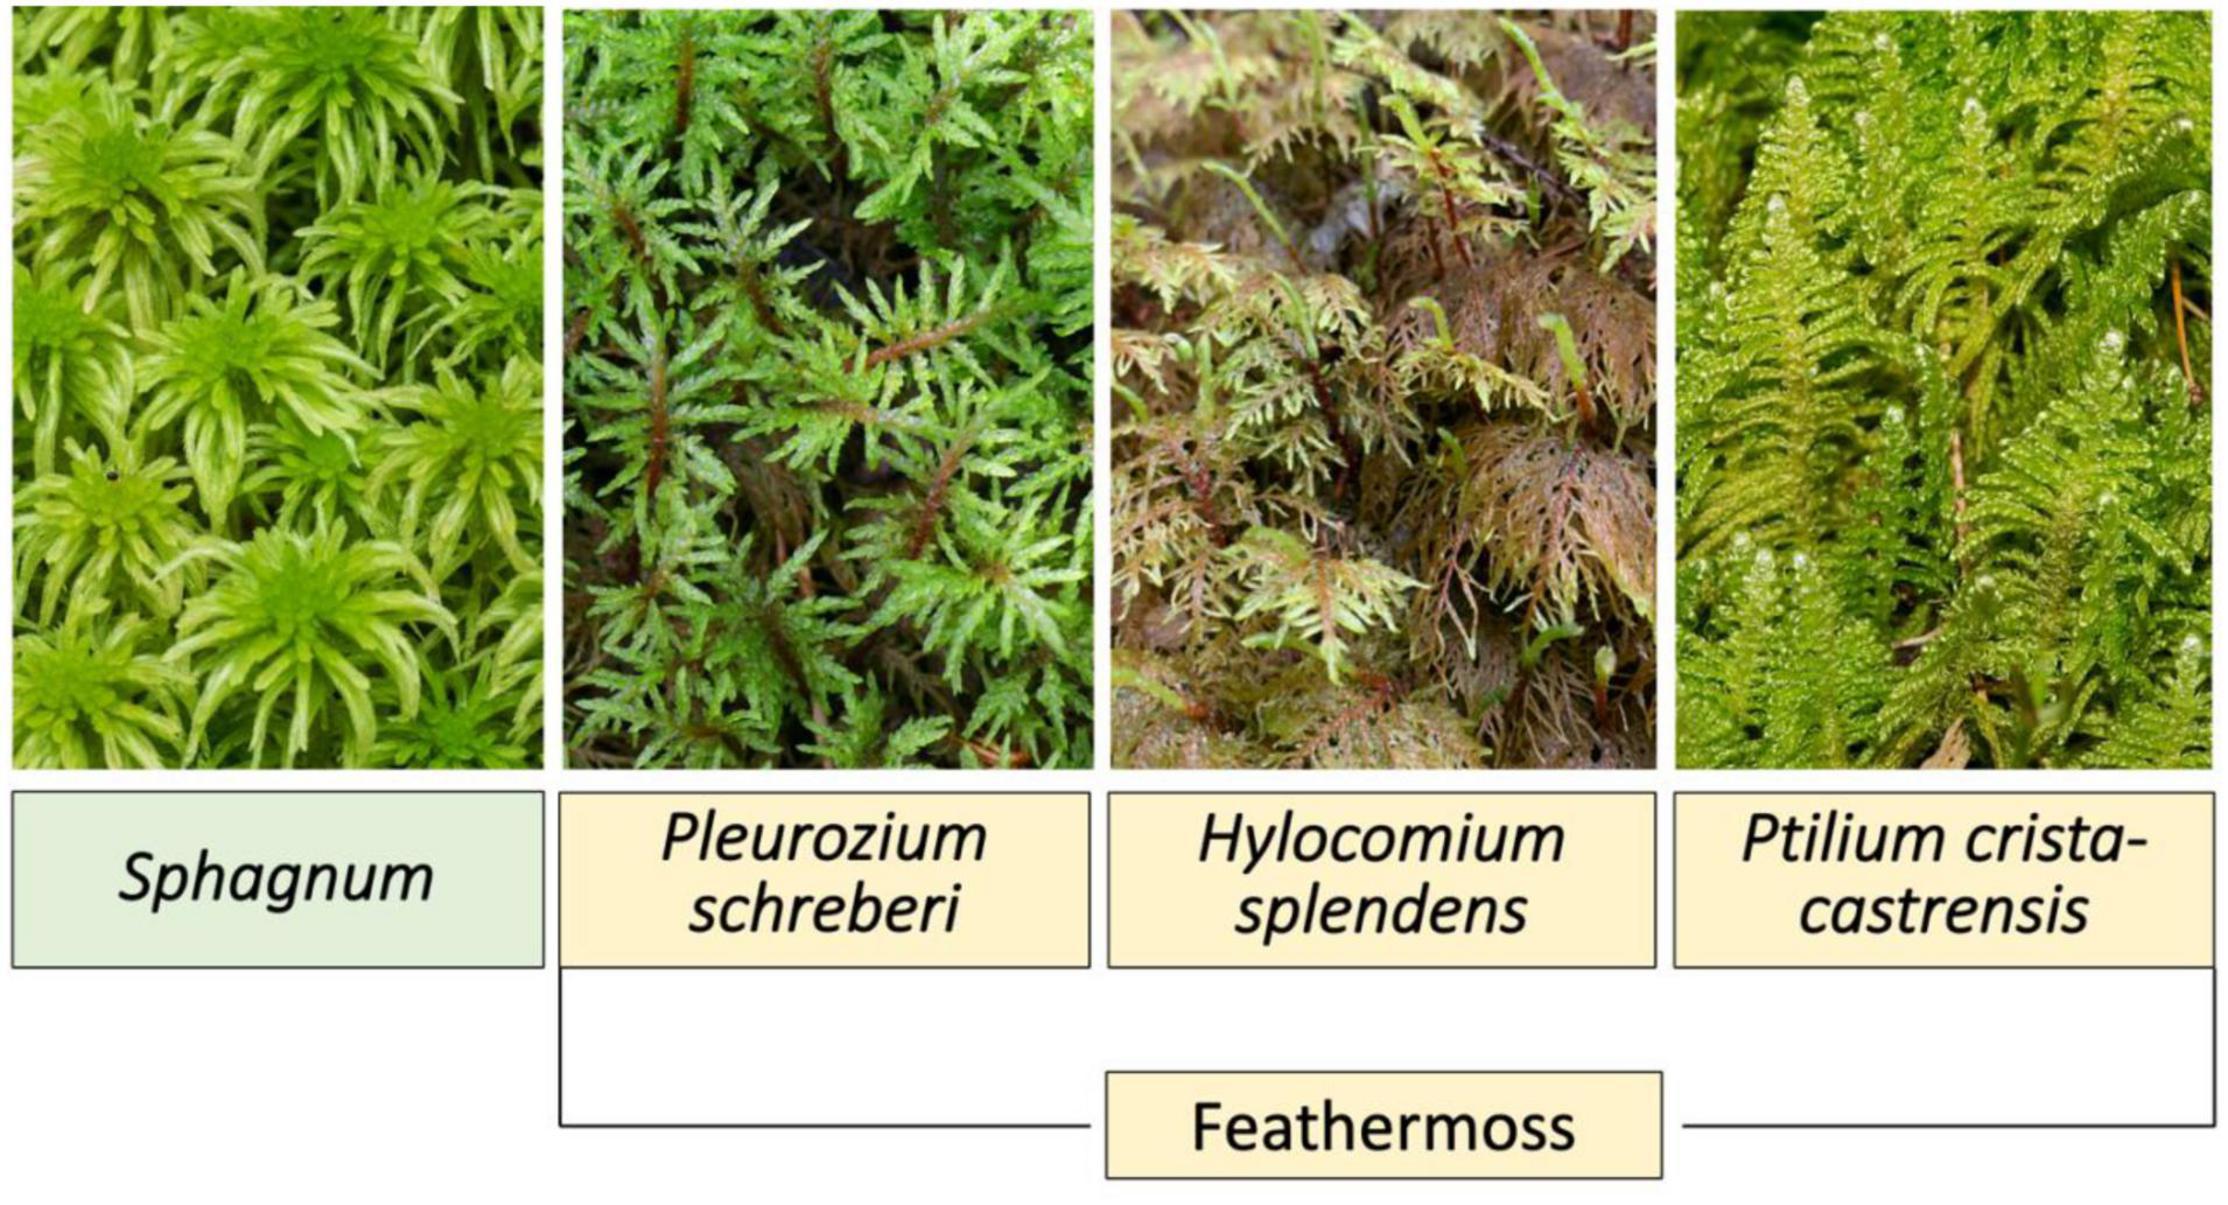 Peat Moss vs. Sphagnum Moss: Differences and Similarities